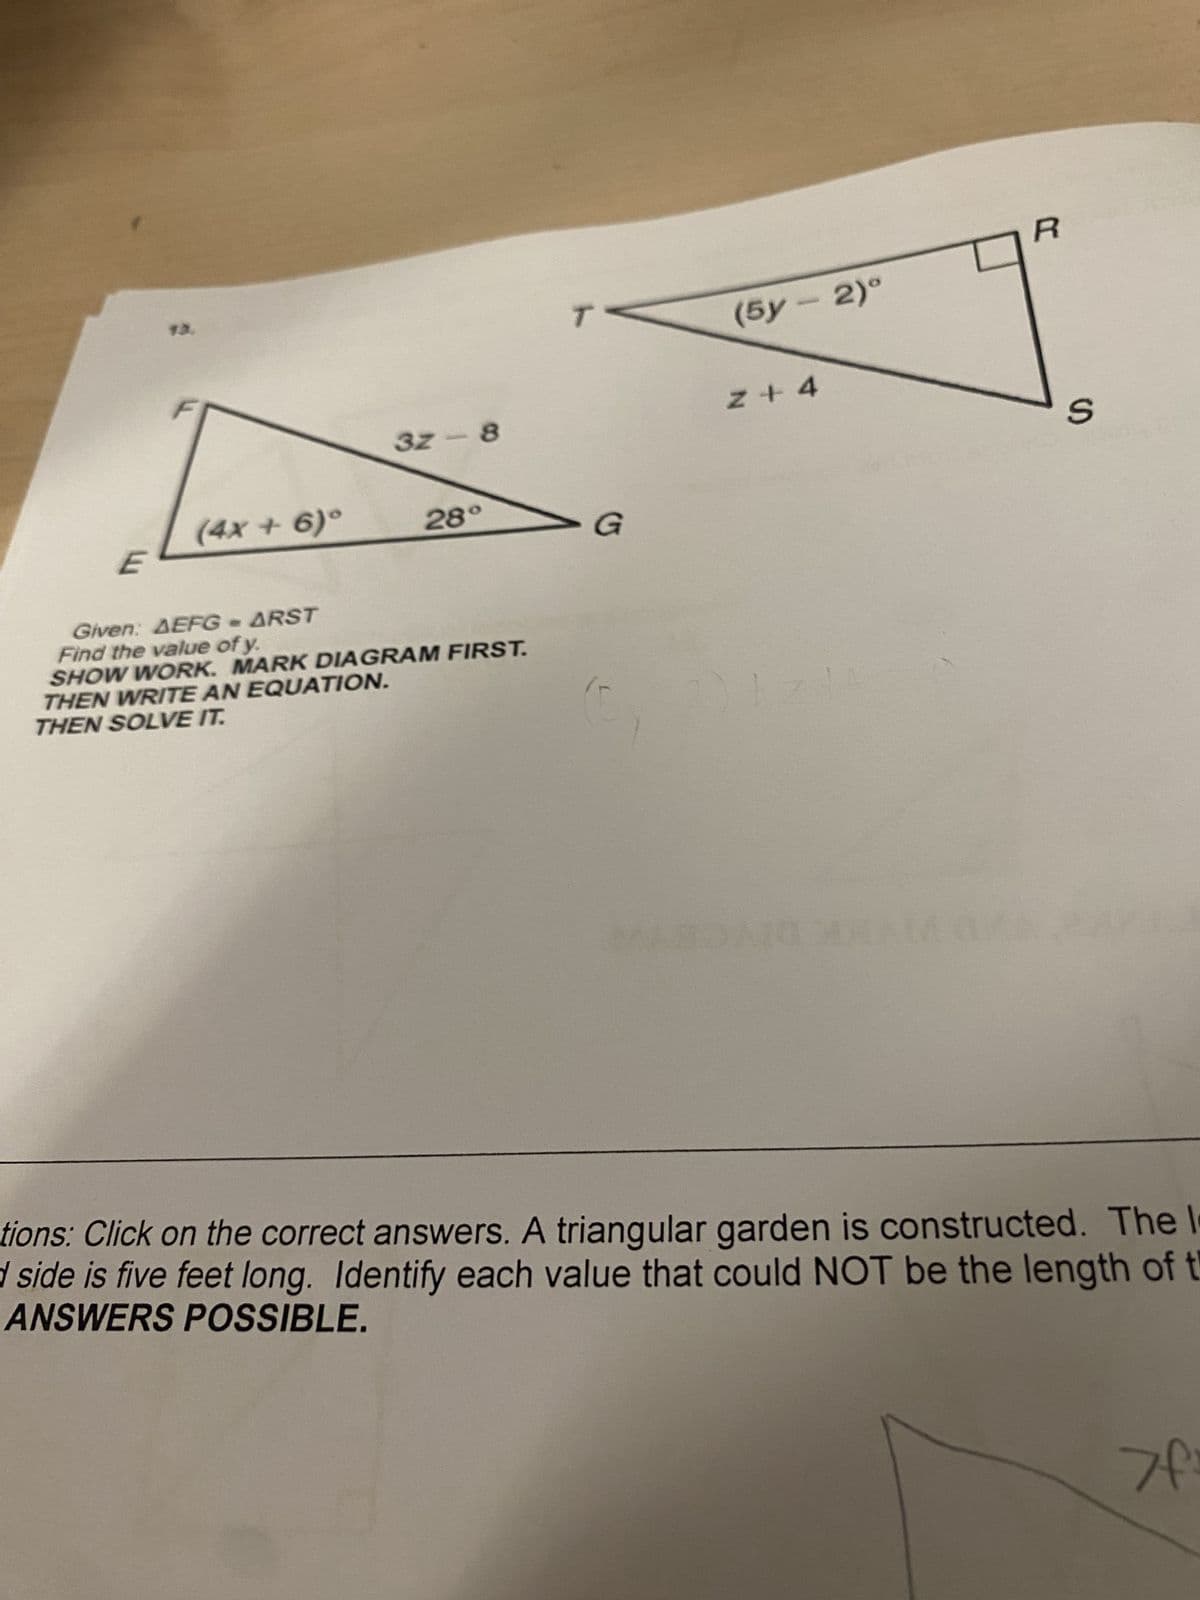 13.
3z-8
(4x+6)°
28°
E
G
Given: AEFG - ARST
Find the value of y.
SHOW WORK. MARK DIAGRAM FIRST.
THEN WRITE AN EQUATION.
THEN SOLVE IT.
R
(5y-2)°
Z+4
S
tions: Click on the correct answers. A triangular garden is constructed. The l
d side is five feet long. Identify each value that could NOT be the length of t
ANSWERS POSSIBLE.
If